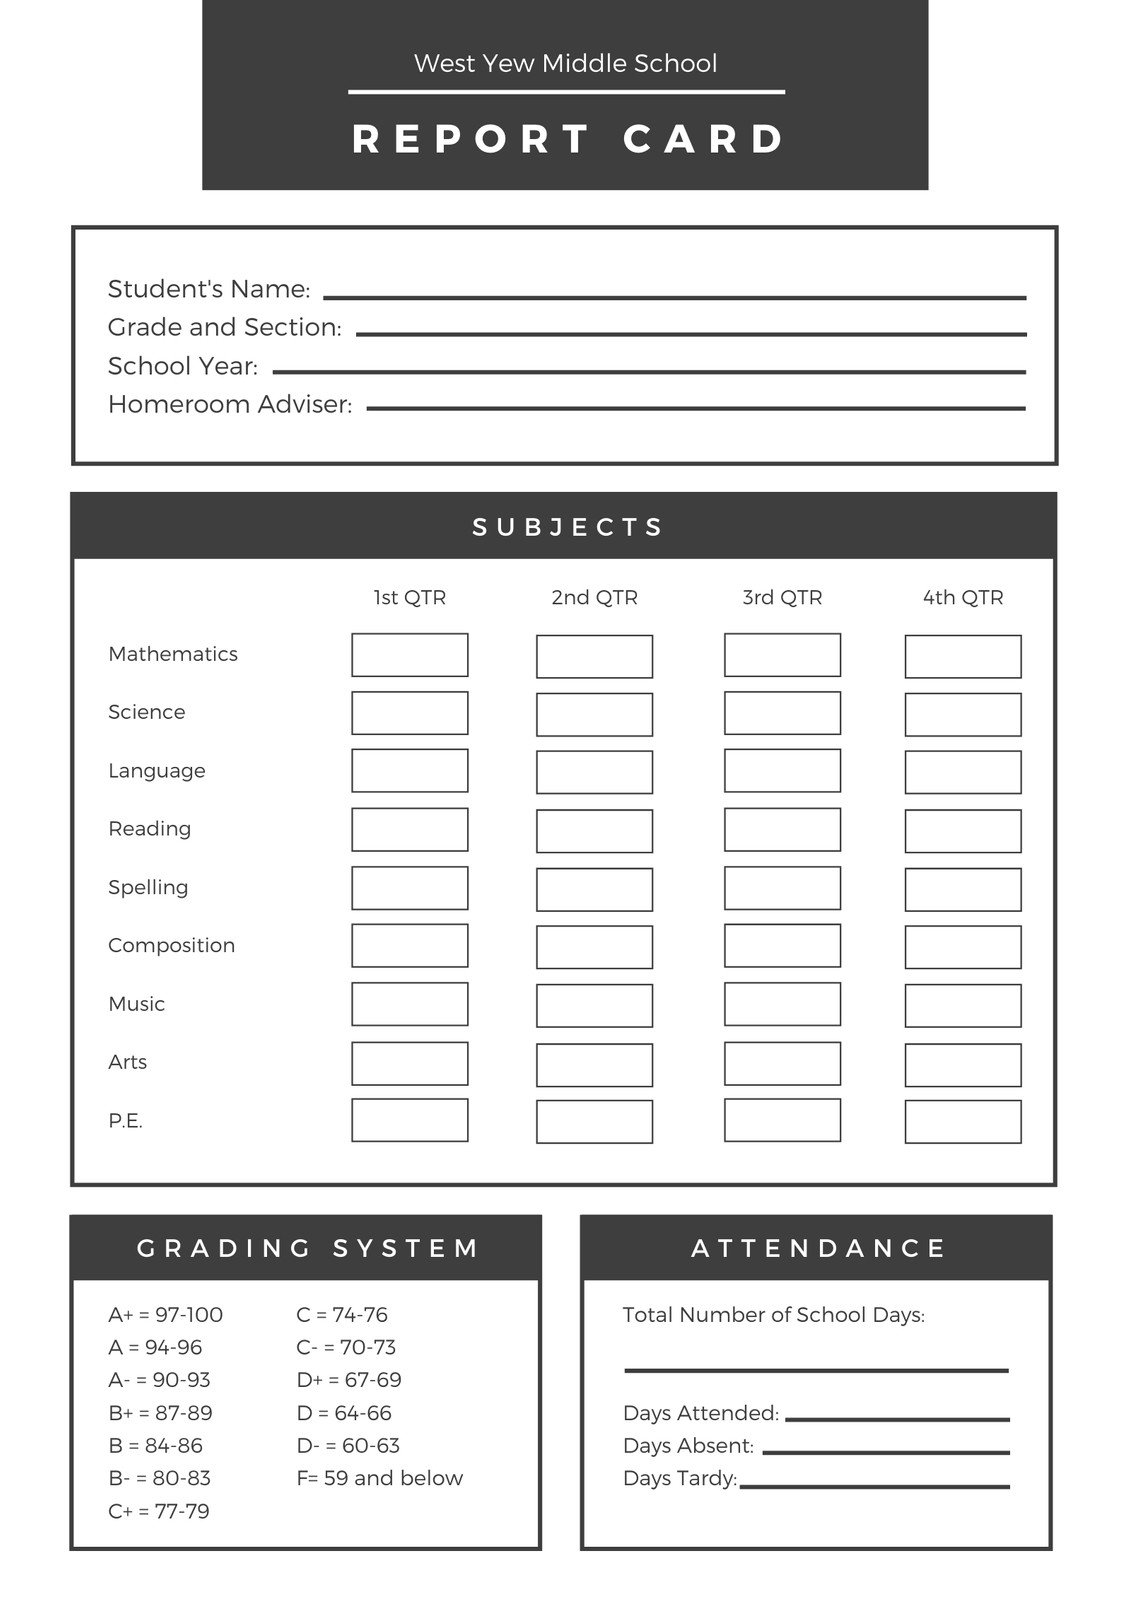 Free, printable, customizable report card templates  Canva For High School Report Card Template